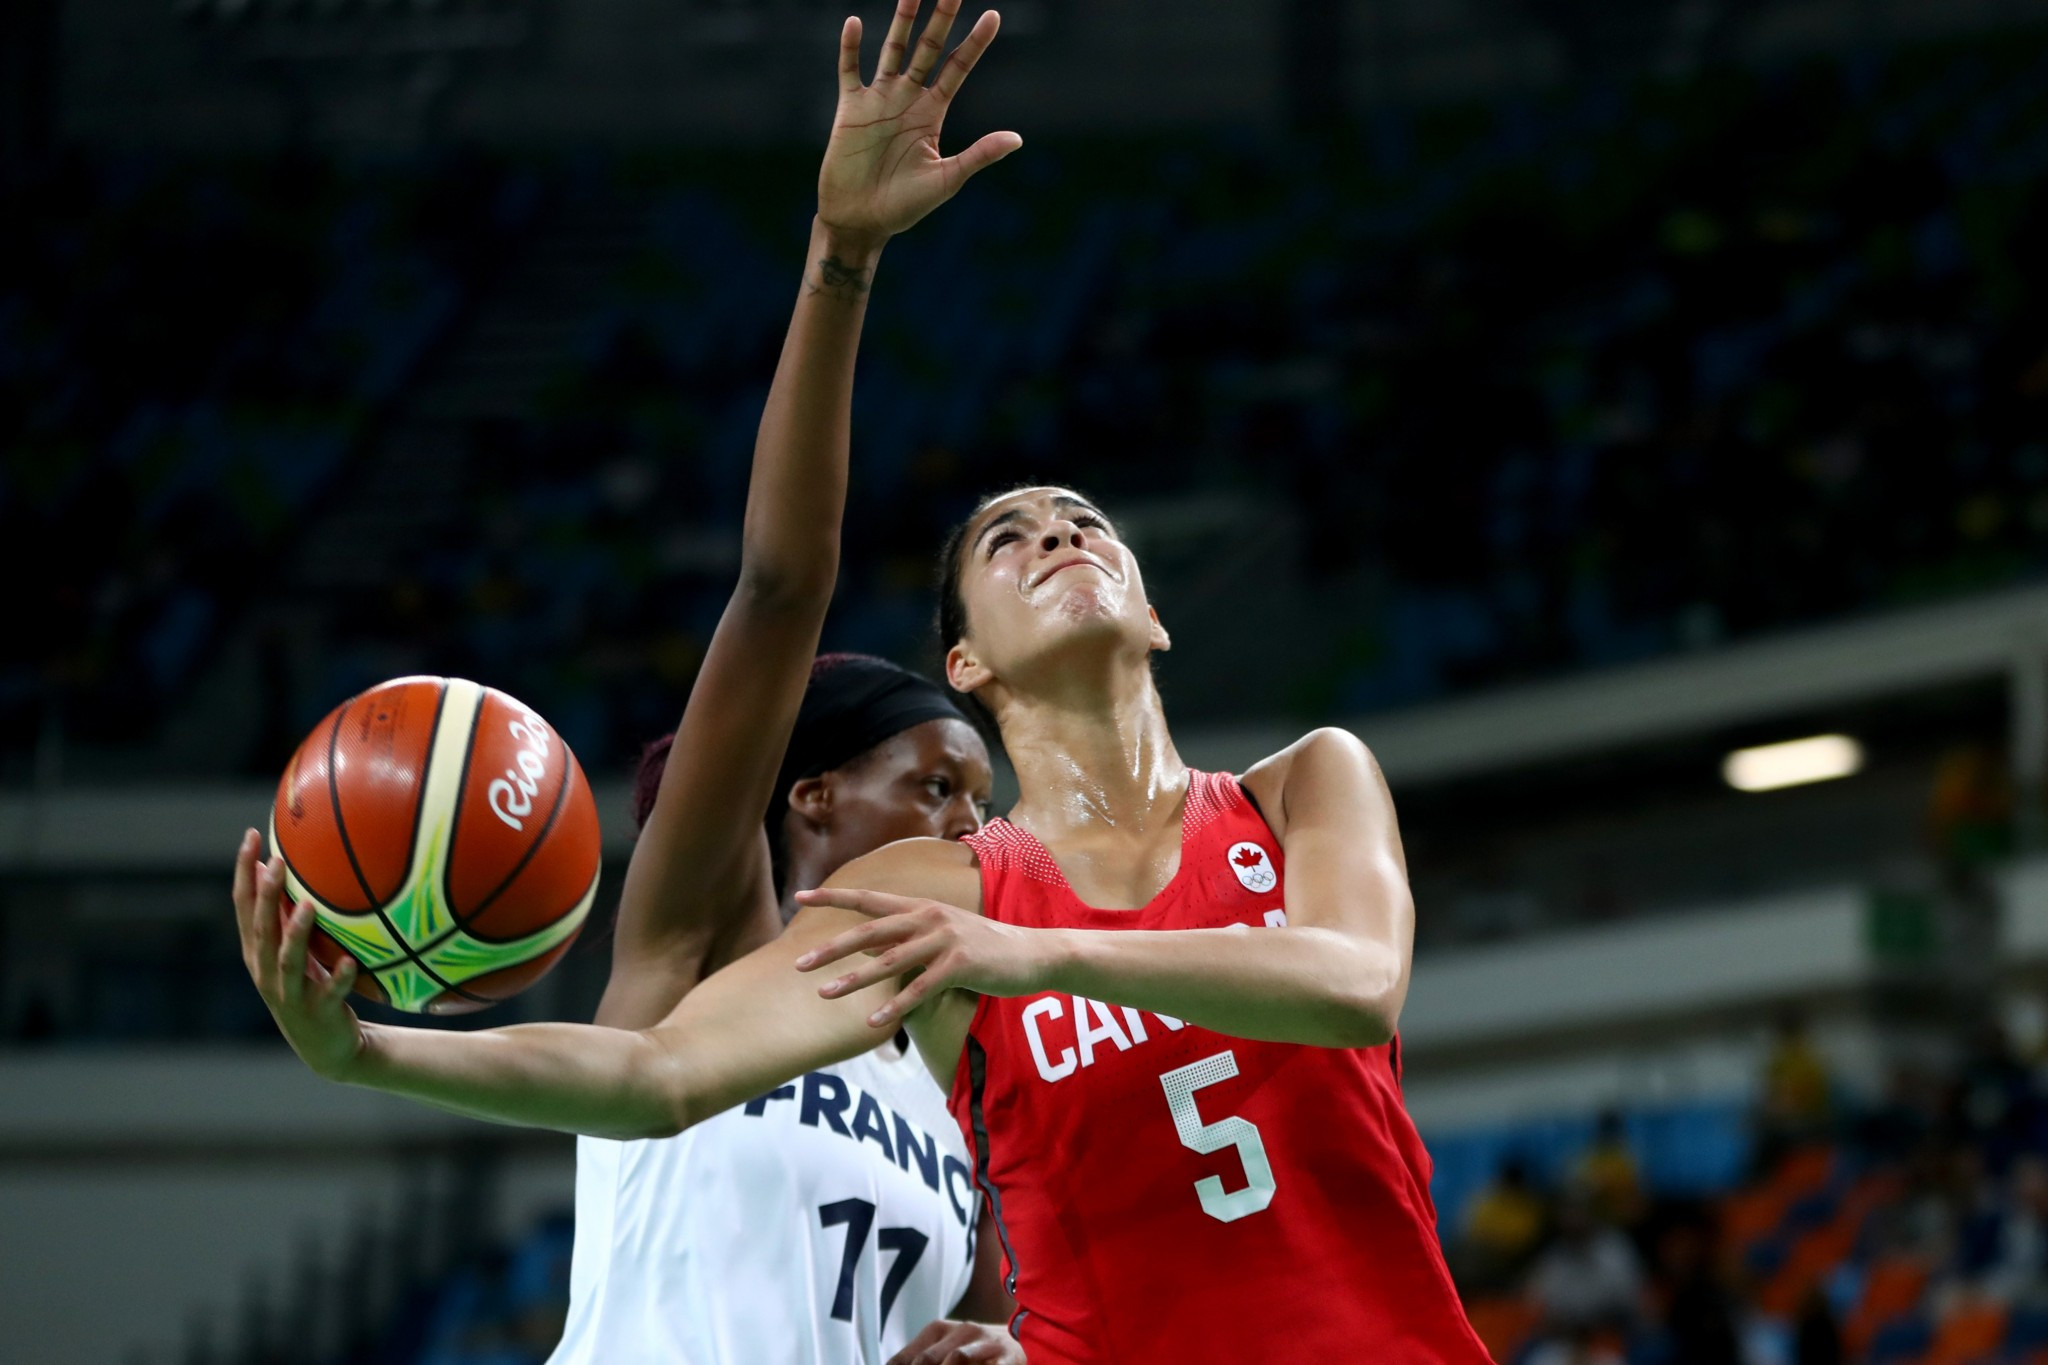 Kia Nurse has been included in the Canadian team looking to defend their FIBA Women's AmeriCup title ©Getty Images